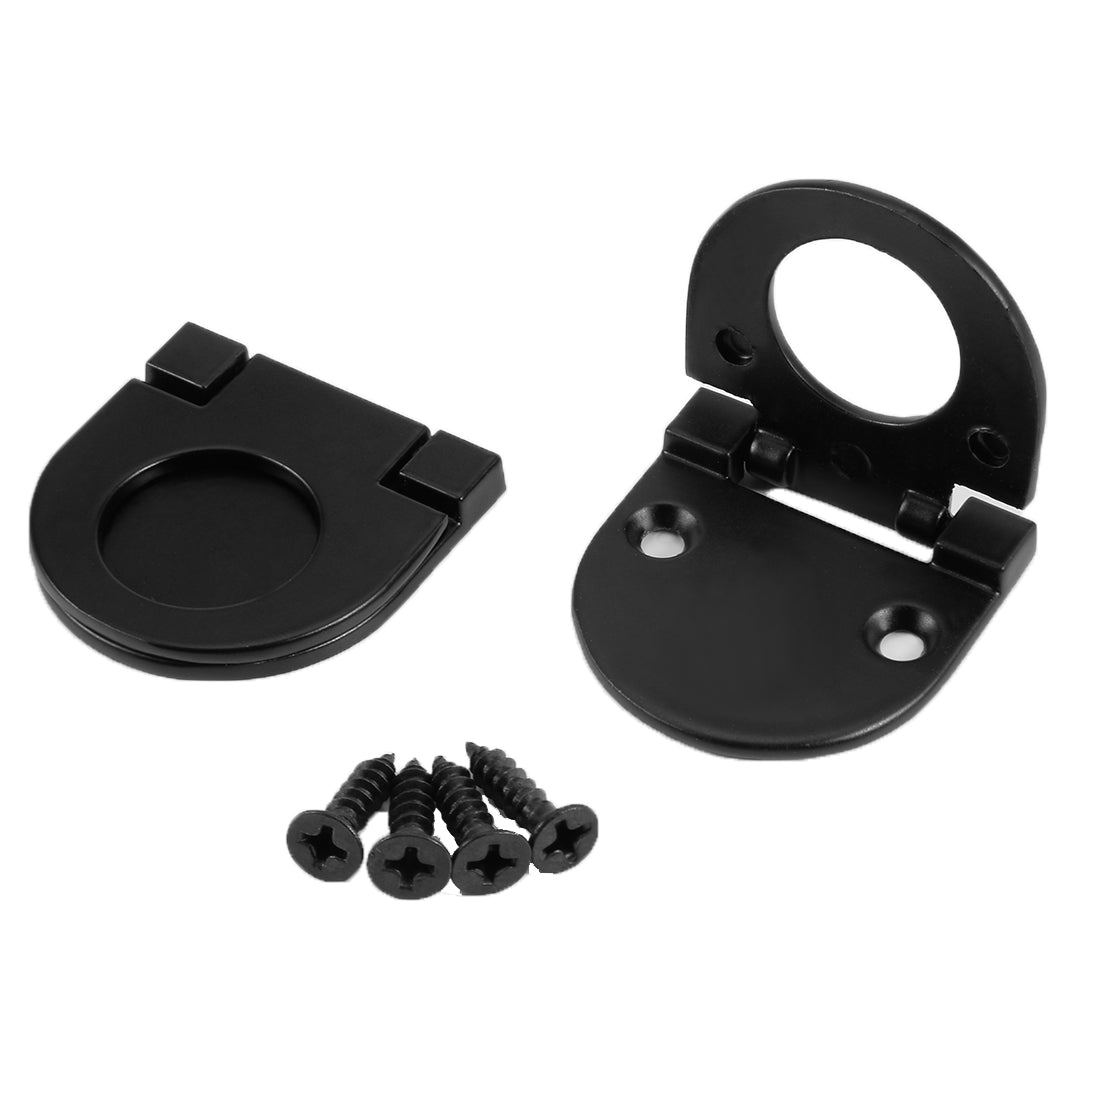 uxcell Uxcell 1-3/8" x 1-3/8" Door Drawer Handle Flush Ring Pull Zinc Alloy Black 2pcs